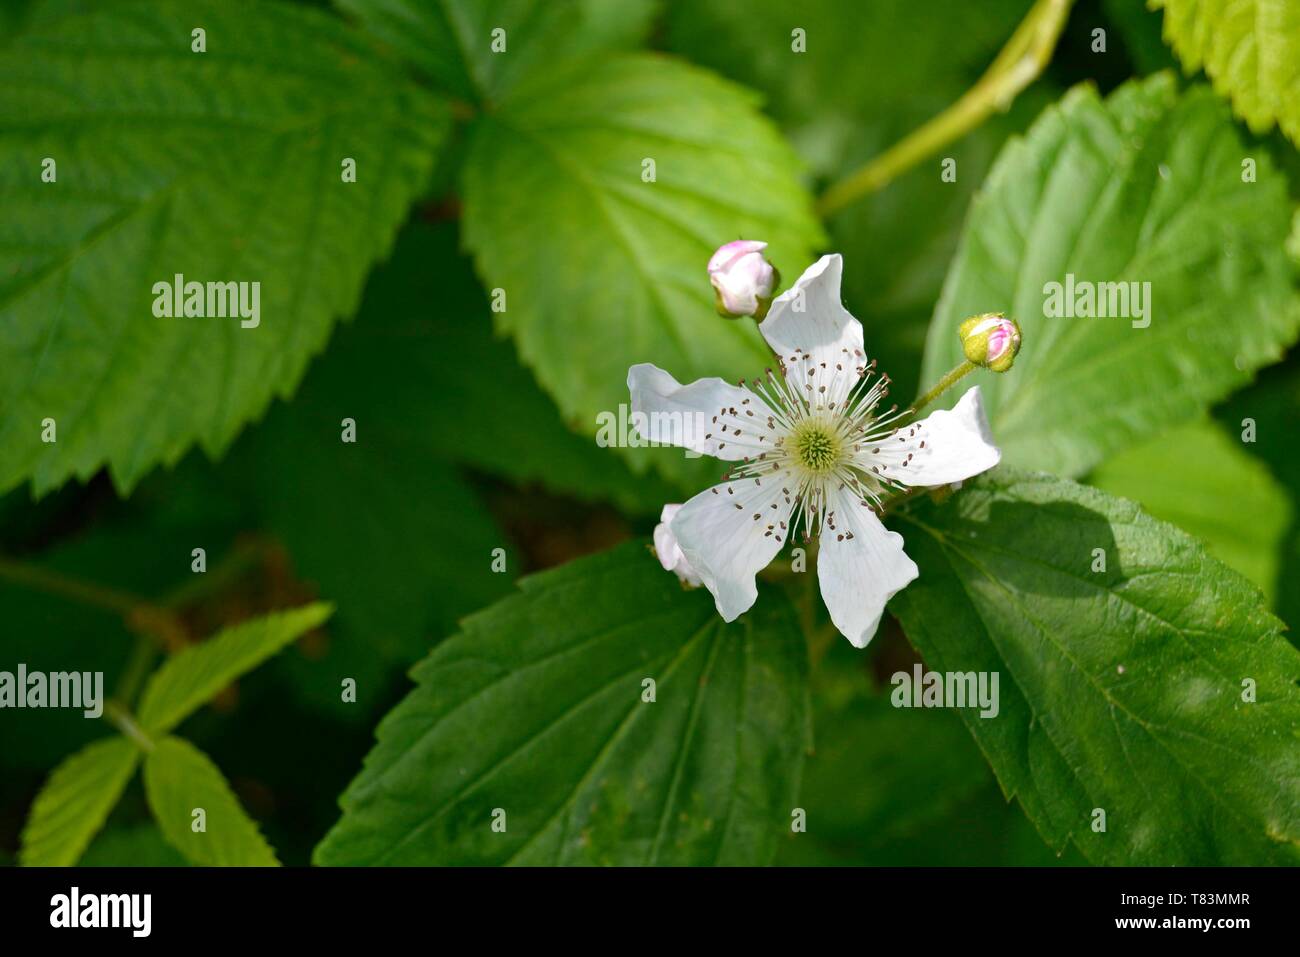 Closeup of a White Blackberry Flower with Green Leaves Stock Photo